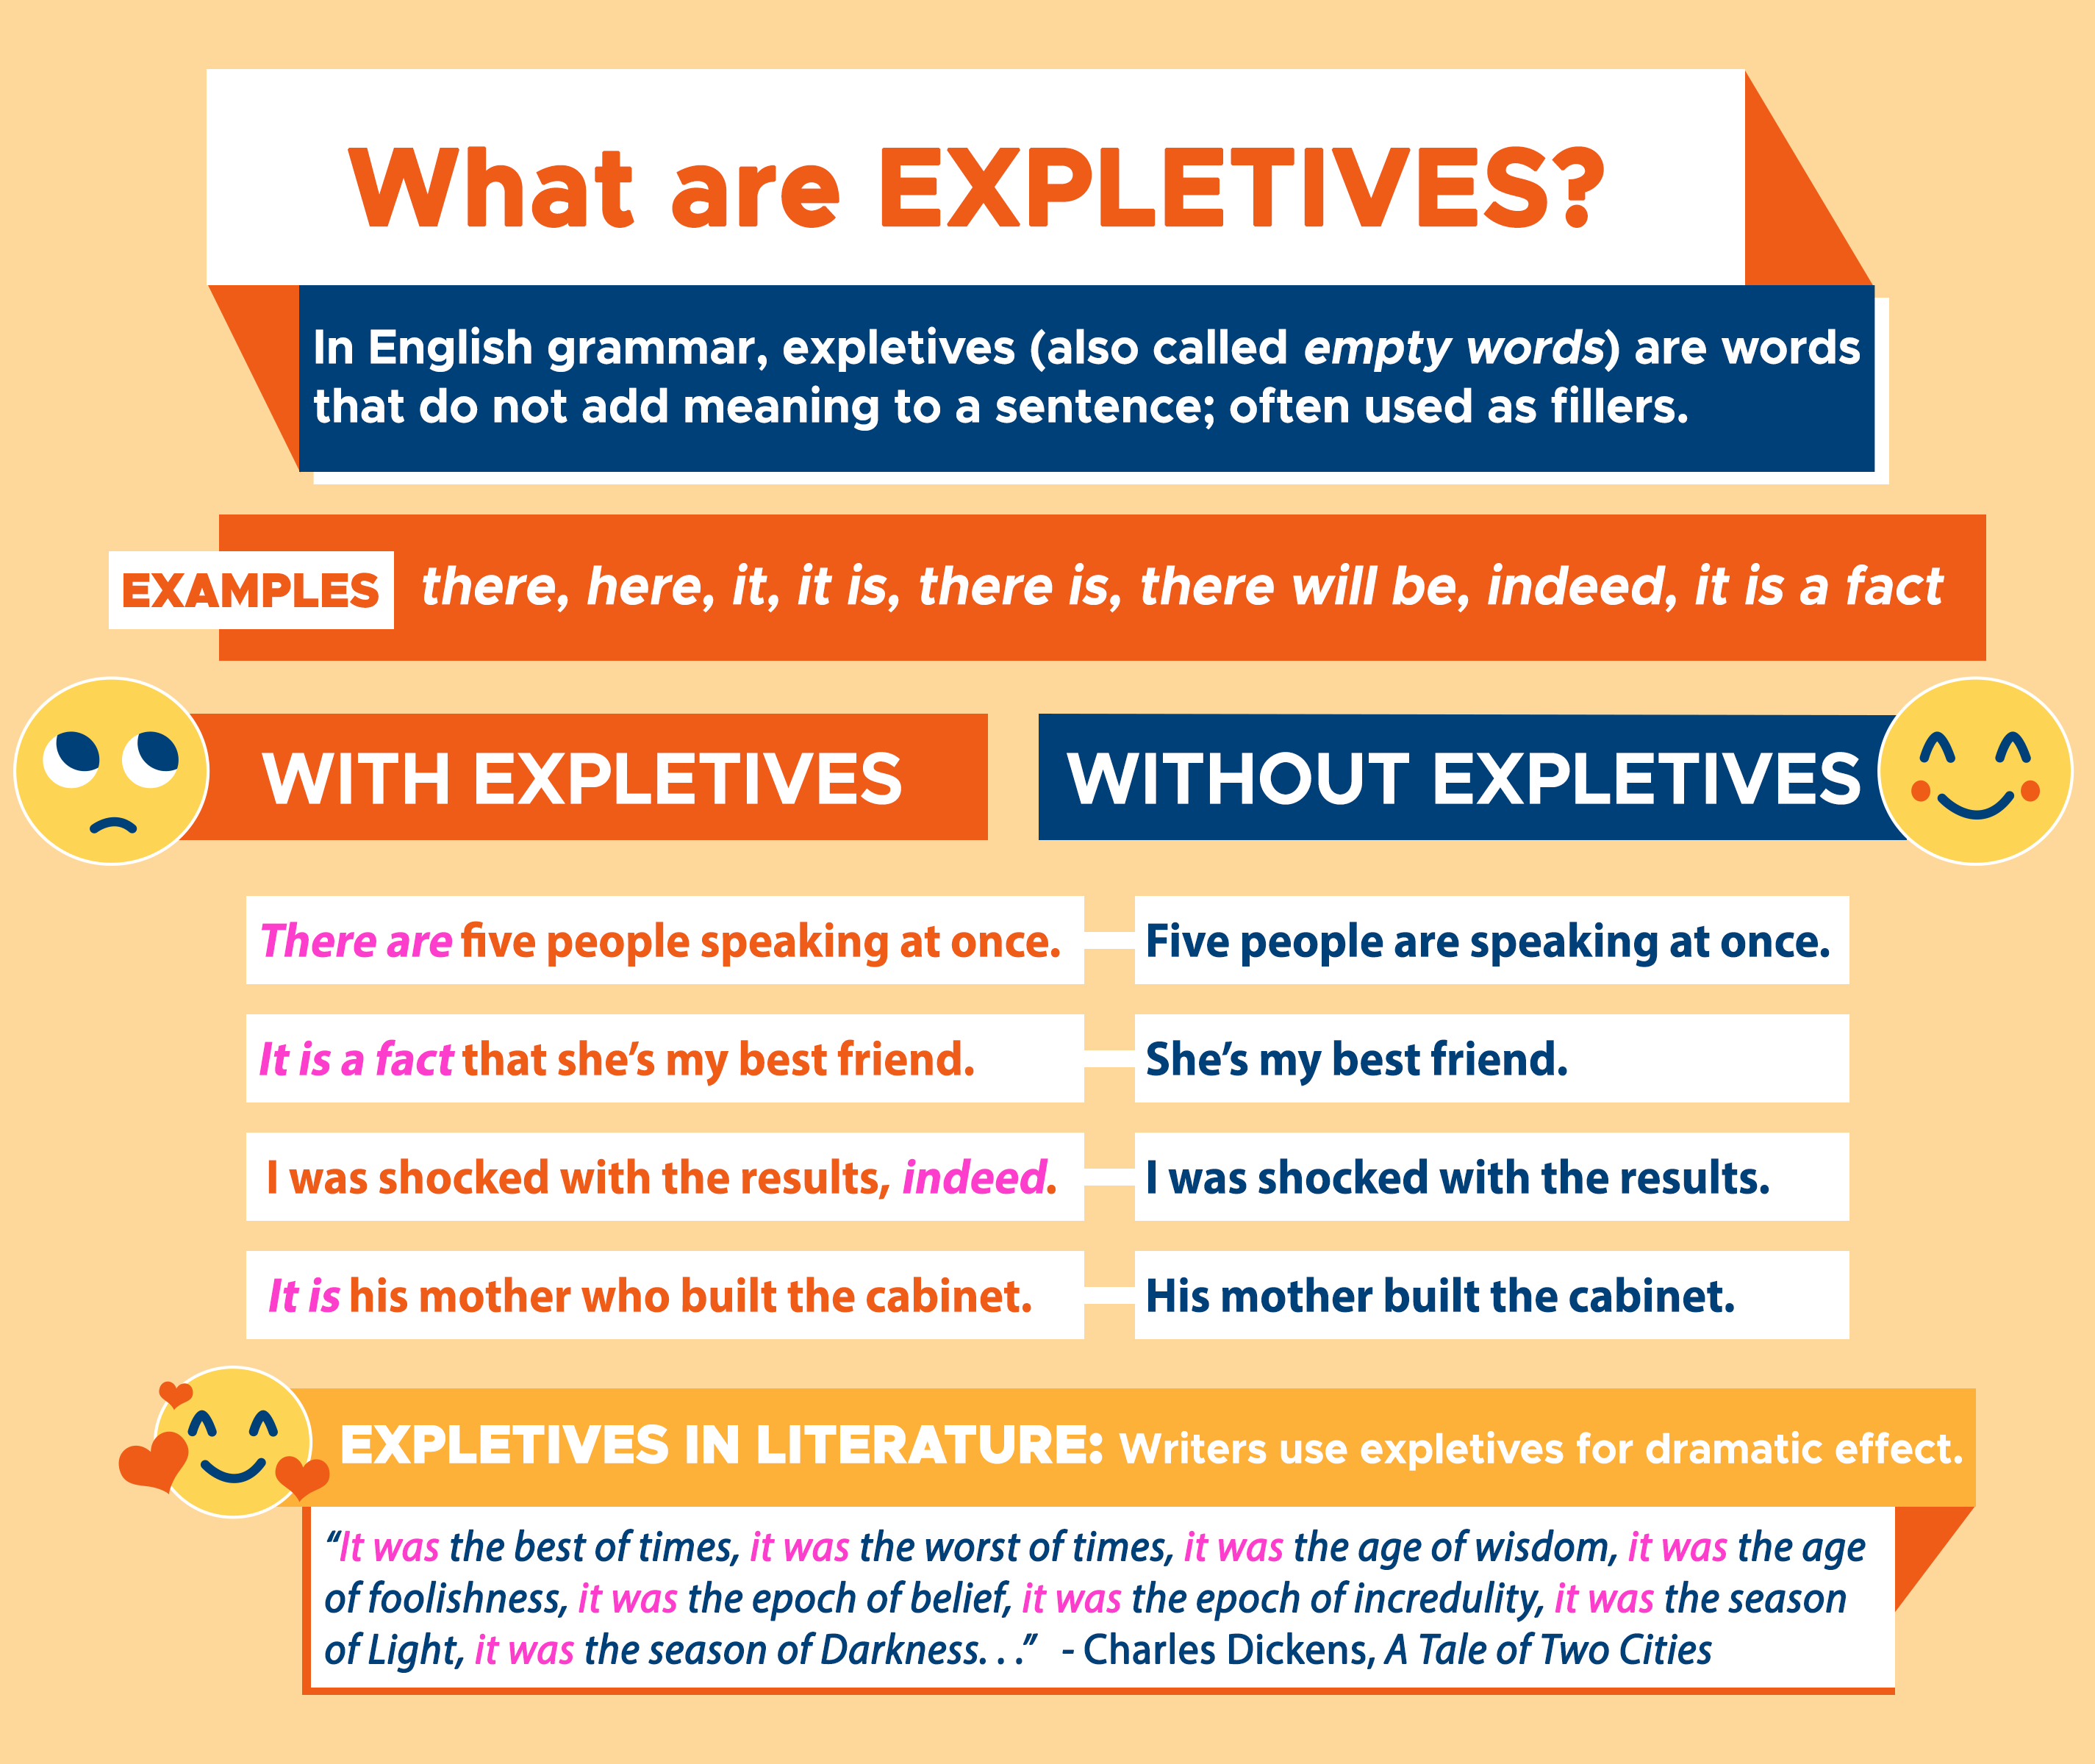 Expletive: A Word that Does Not Add Meaning - Curvebreakers